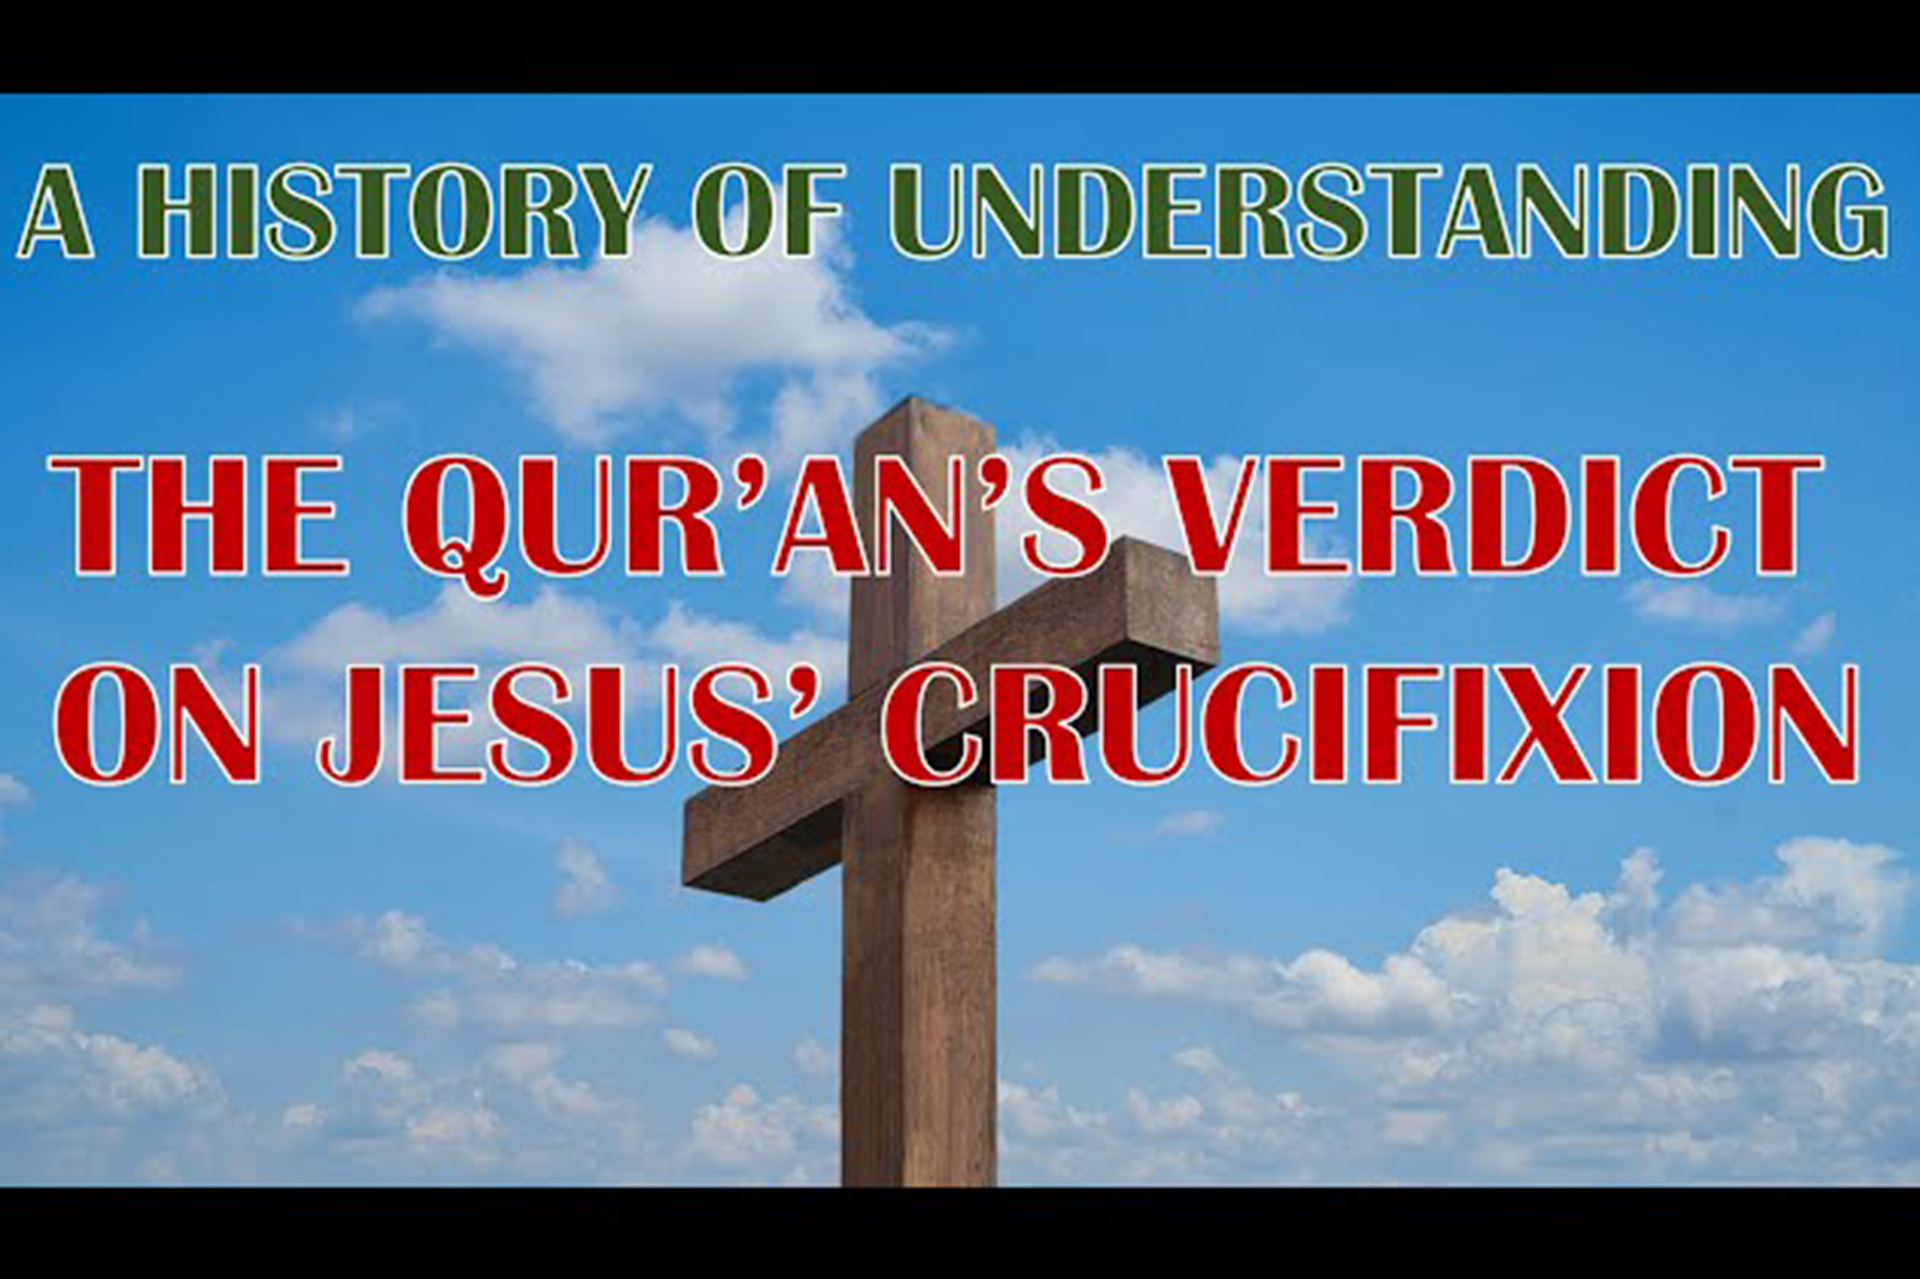 A History of Understanding the Qur’an’s Verdict on Jesus’ Crucifixion